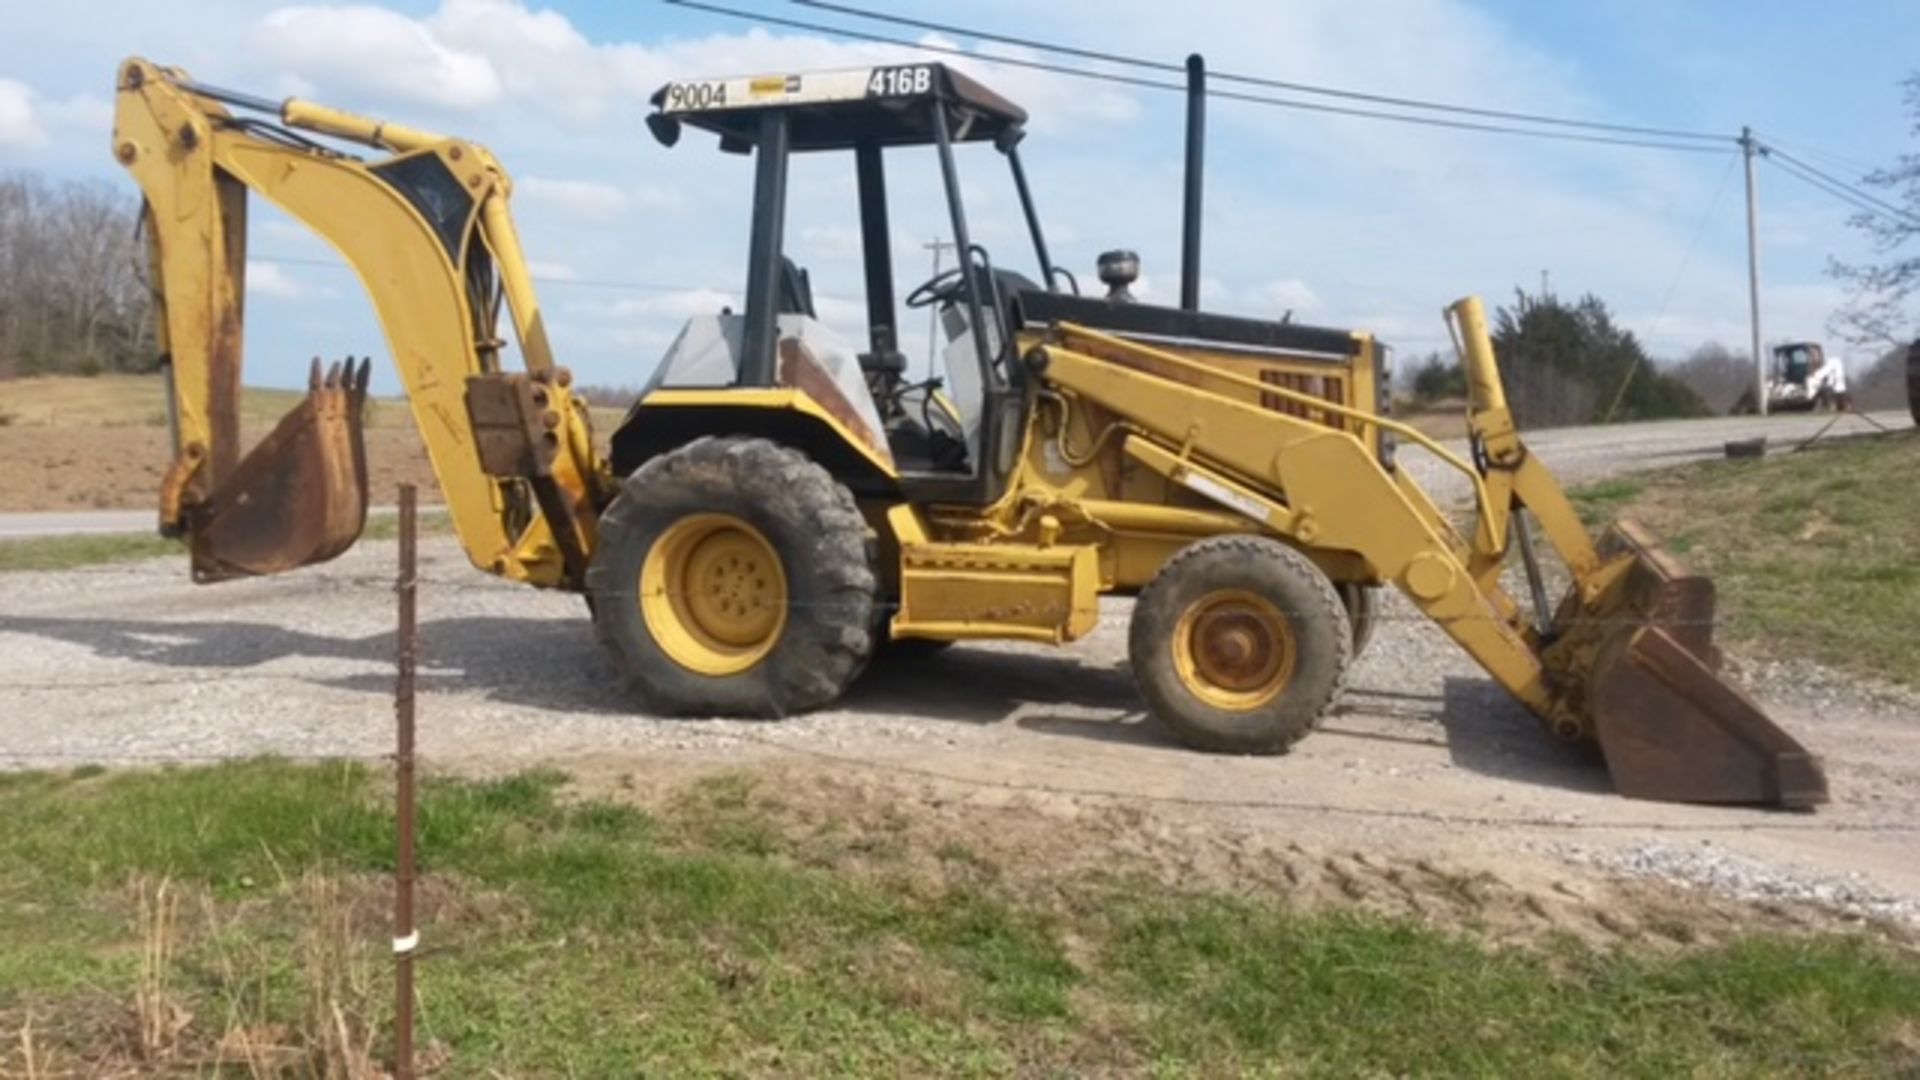 CAT 416B Loader/Backhoe, OROPS, 2WD, New Side covers and Exhaust S/N 85G09004 (Located at 3823 - Bild 3 aus 3